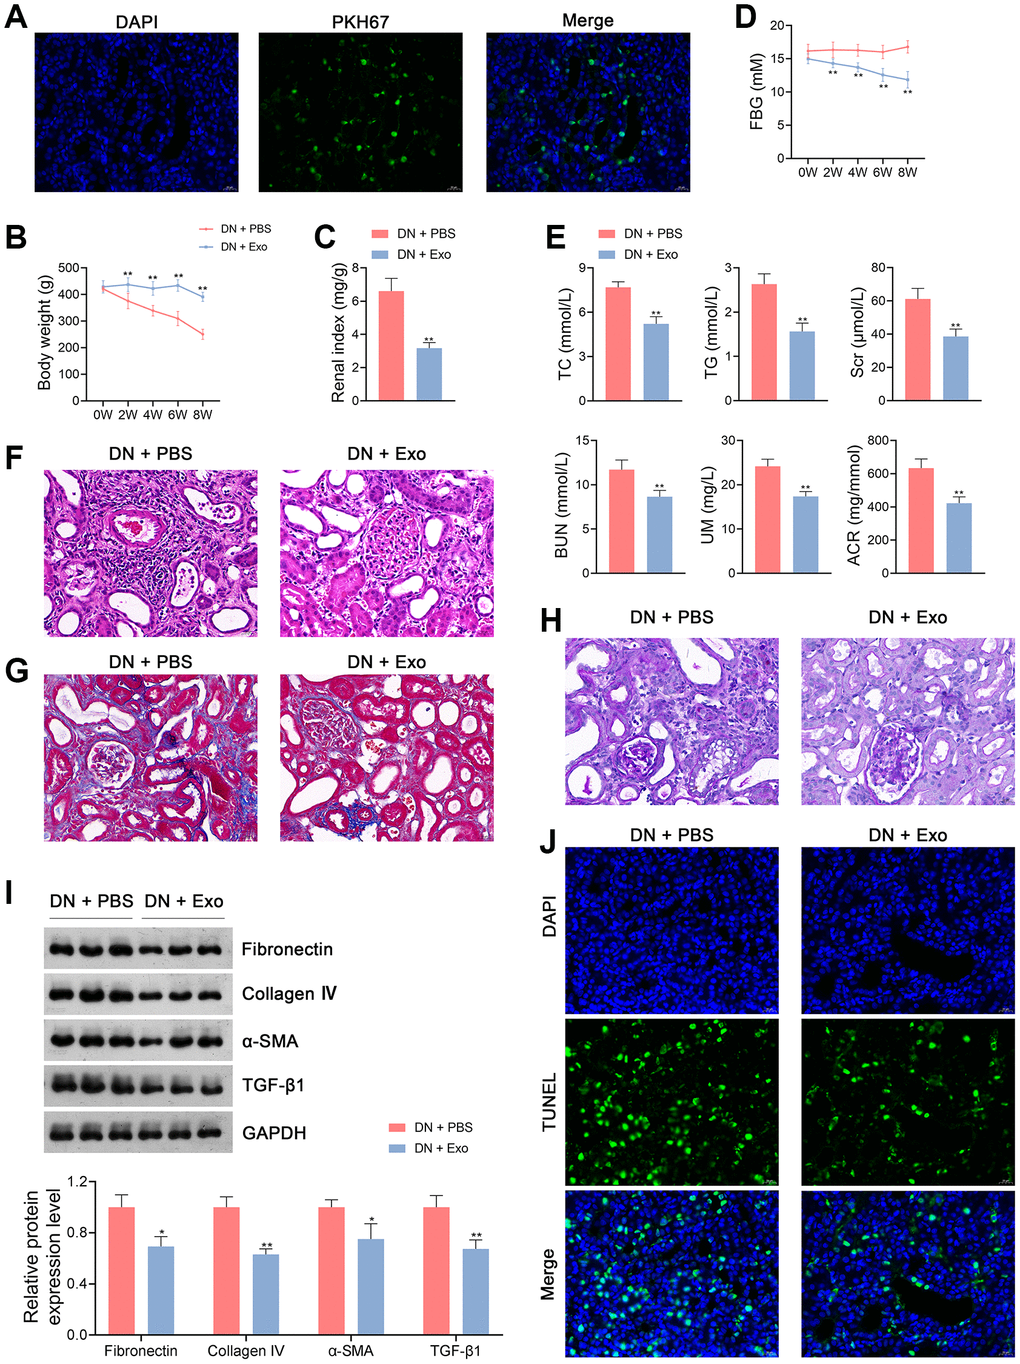 ADSC-derived Exos ameliorate the symptoms of DN in rats. (A) Determination of ADSC-derived Exos taken up by the kidney tissue cells of rats in each group using PKH67 staining. (B–D) The body weights, renal index, and FBG levels of rats in each group. (E) Plasma TC TG, Scr, BUN, UM, and ACR of rats in each group using enzymatic colorimetric assay and ELISA. (F–H) Histopathological examinations in the kidney tissues of rats in each group using HE, Masson, and PAS staining (scale bar = 20 μm). (I) The expression of fibronectin, collagen IV, α-SMA, and TGF-β1 in the kidney tissues of rats in each group using western blotting. (J) Cell apoptosis in the kidney tissues of rats in each group using TUNEL assay (scale bar = 20 μm). To explore the therapeutical effects of ADSC-derived Exos on DN, rats were subjected to caudal vein injection with Exos (1.6 mg/kg) for eight successive weeks. Rats treated with the same volume of PBS served as controls. Data were expressed as mean ± standard deviation (n = 6/group). *p **p 